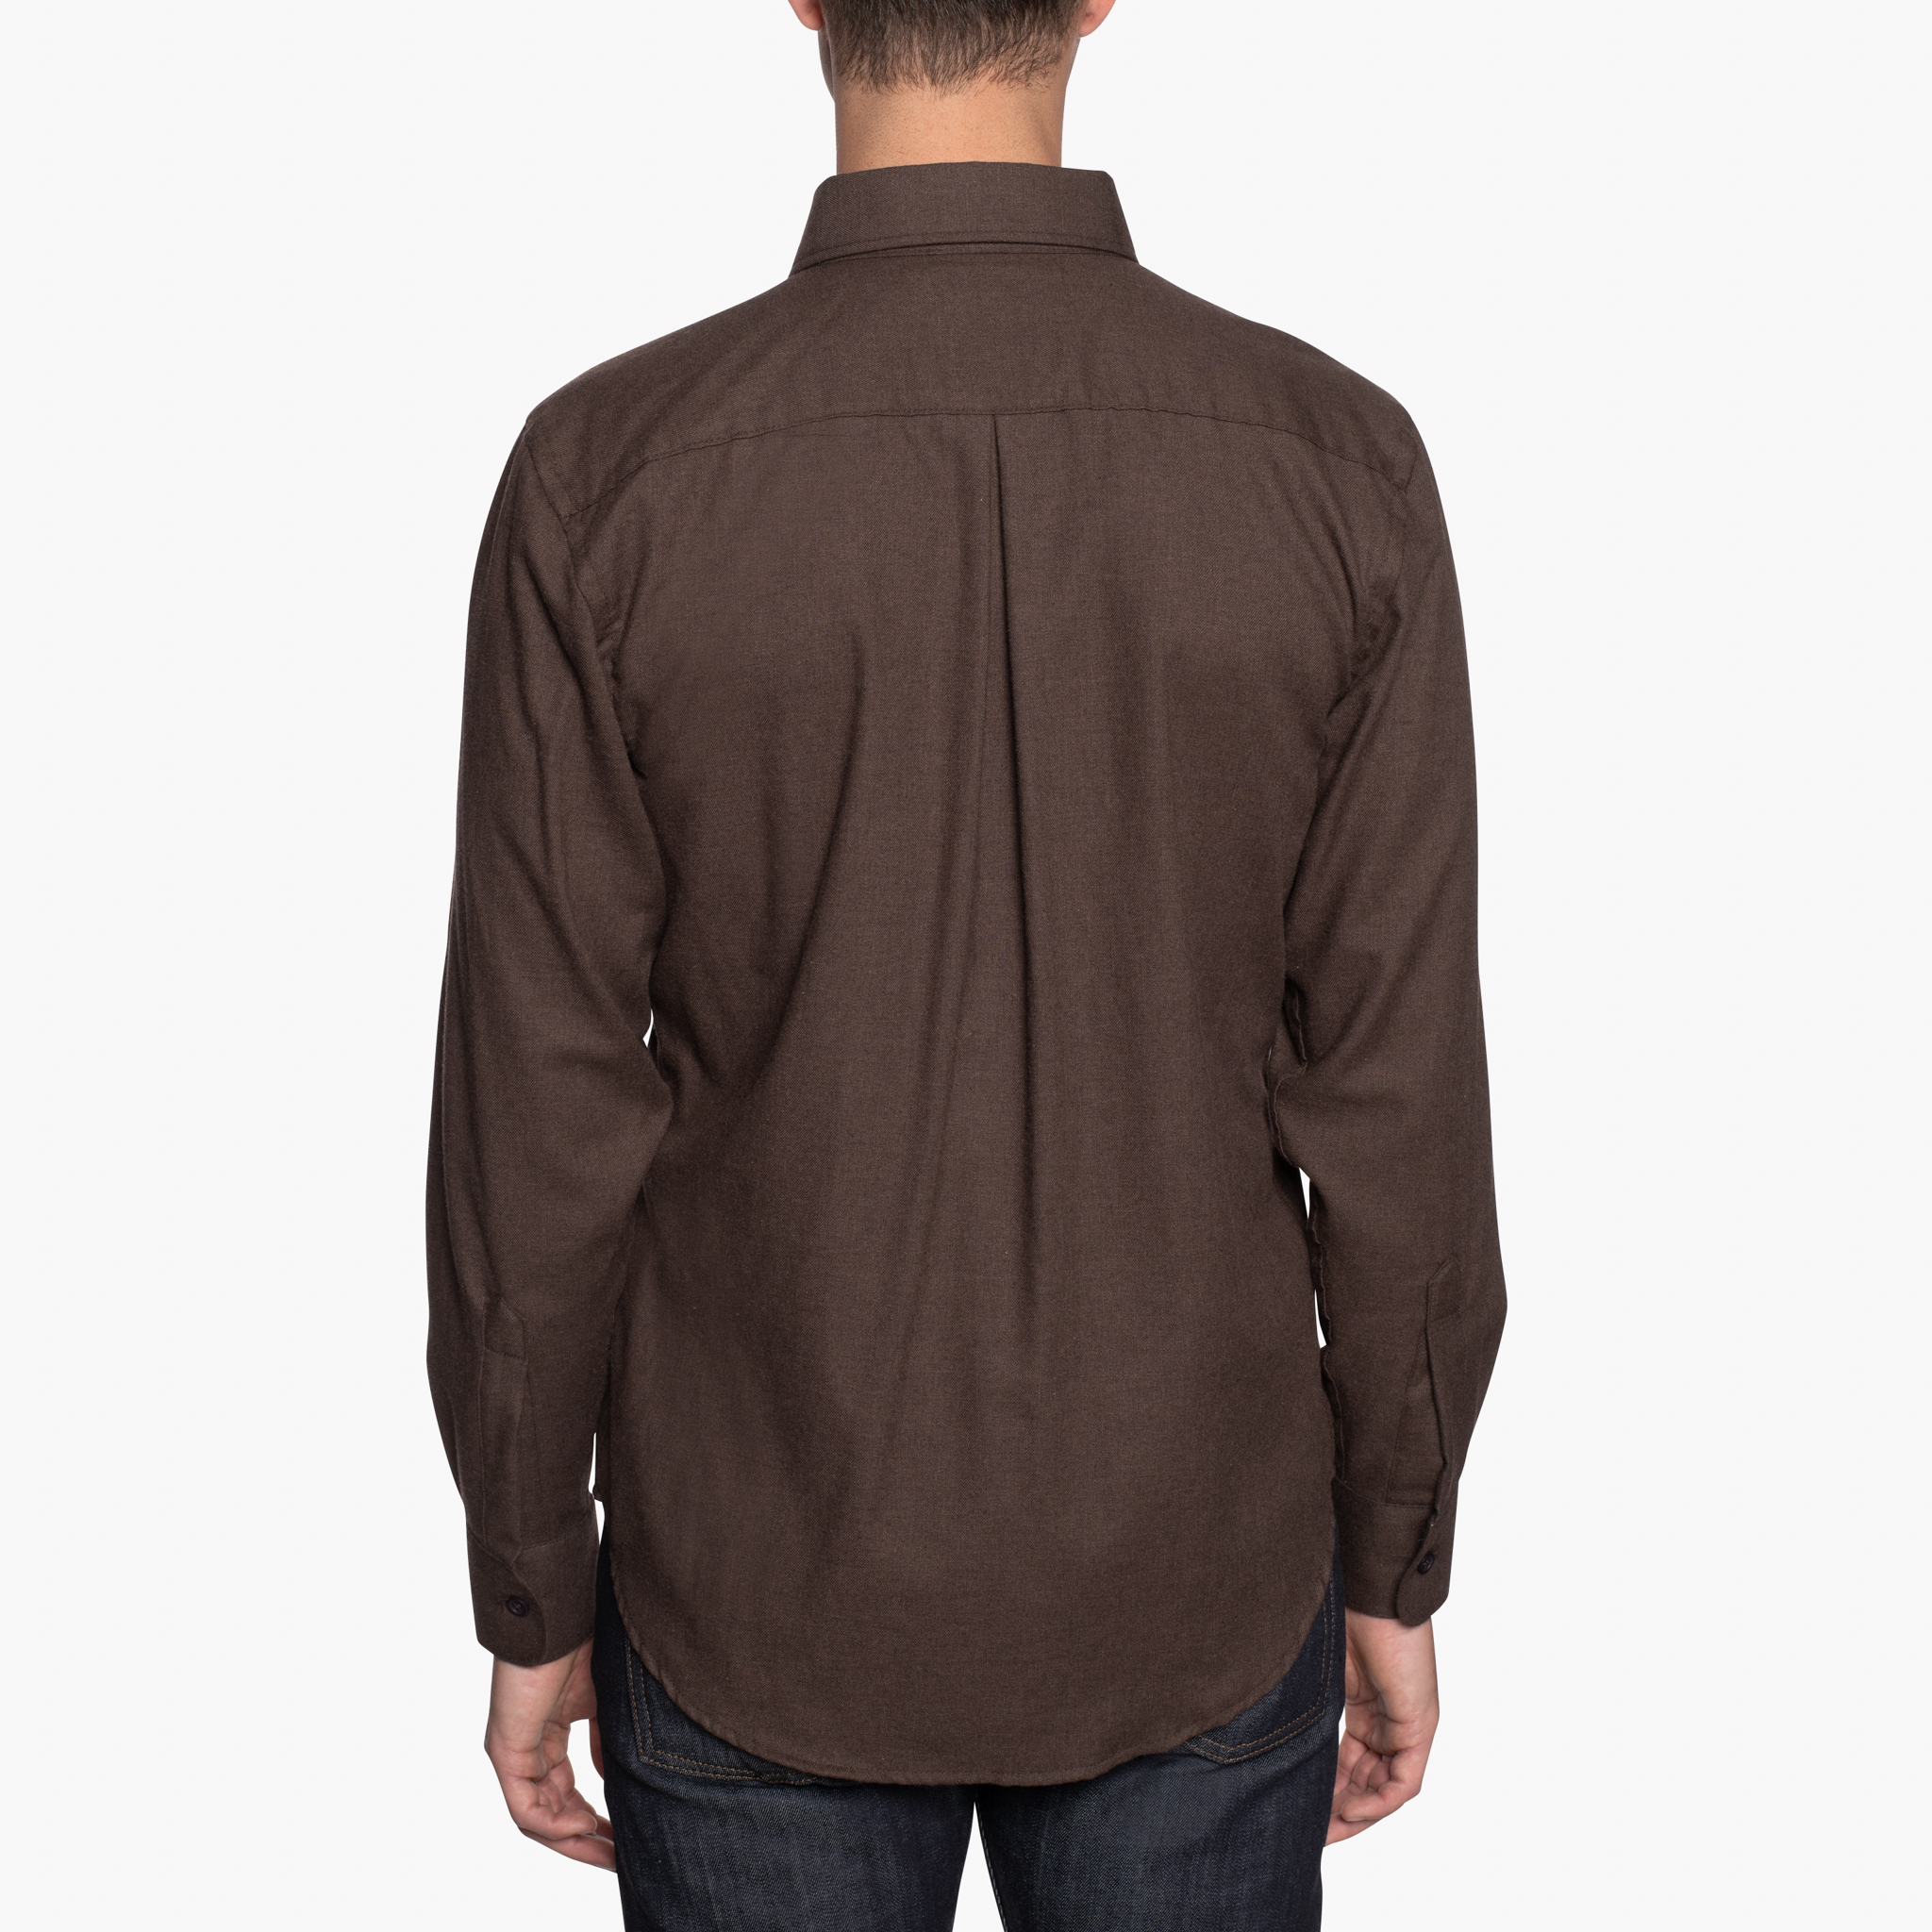  Easy Shirt - Soft Twill - Brown - back 